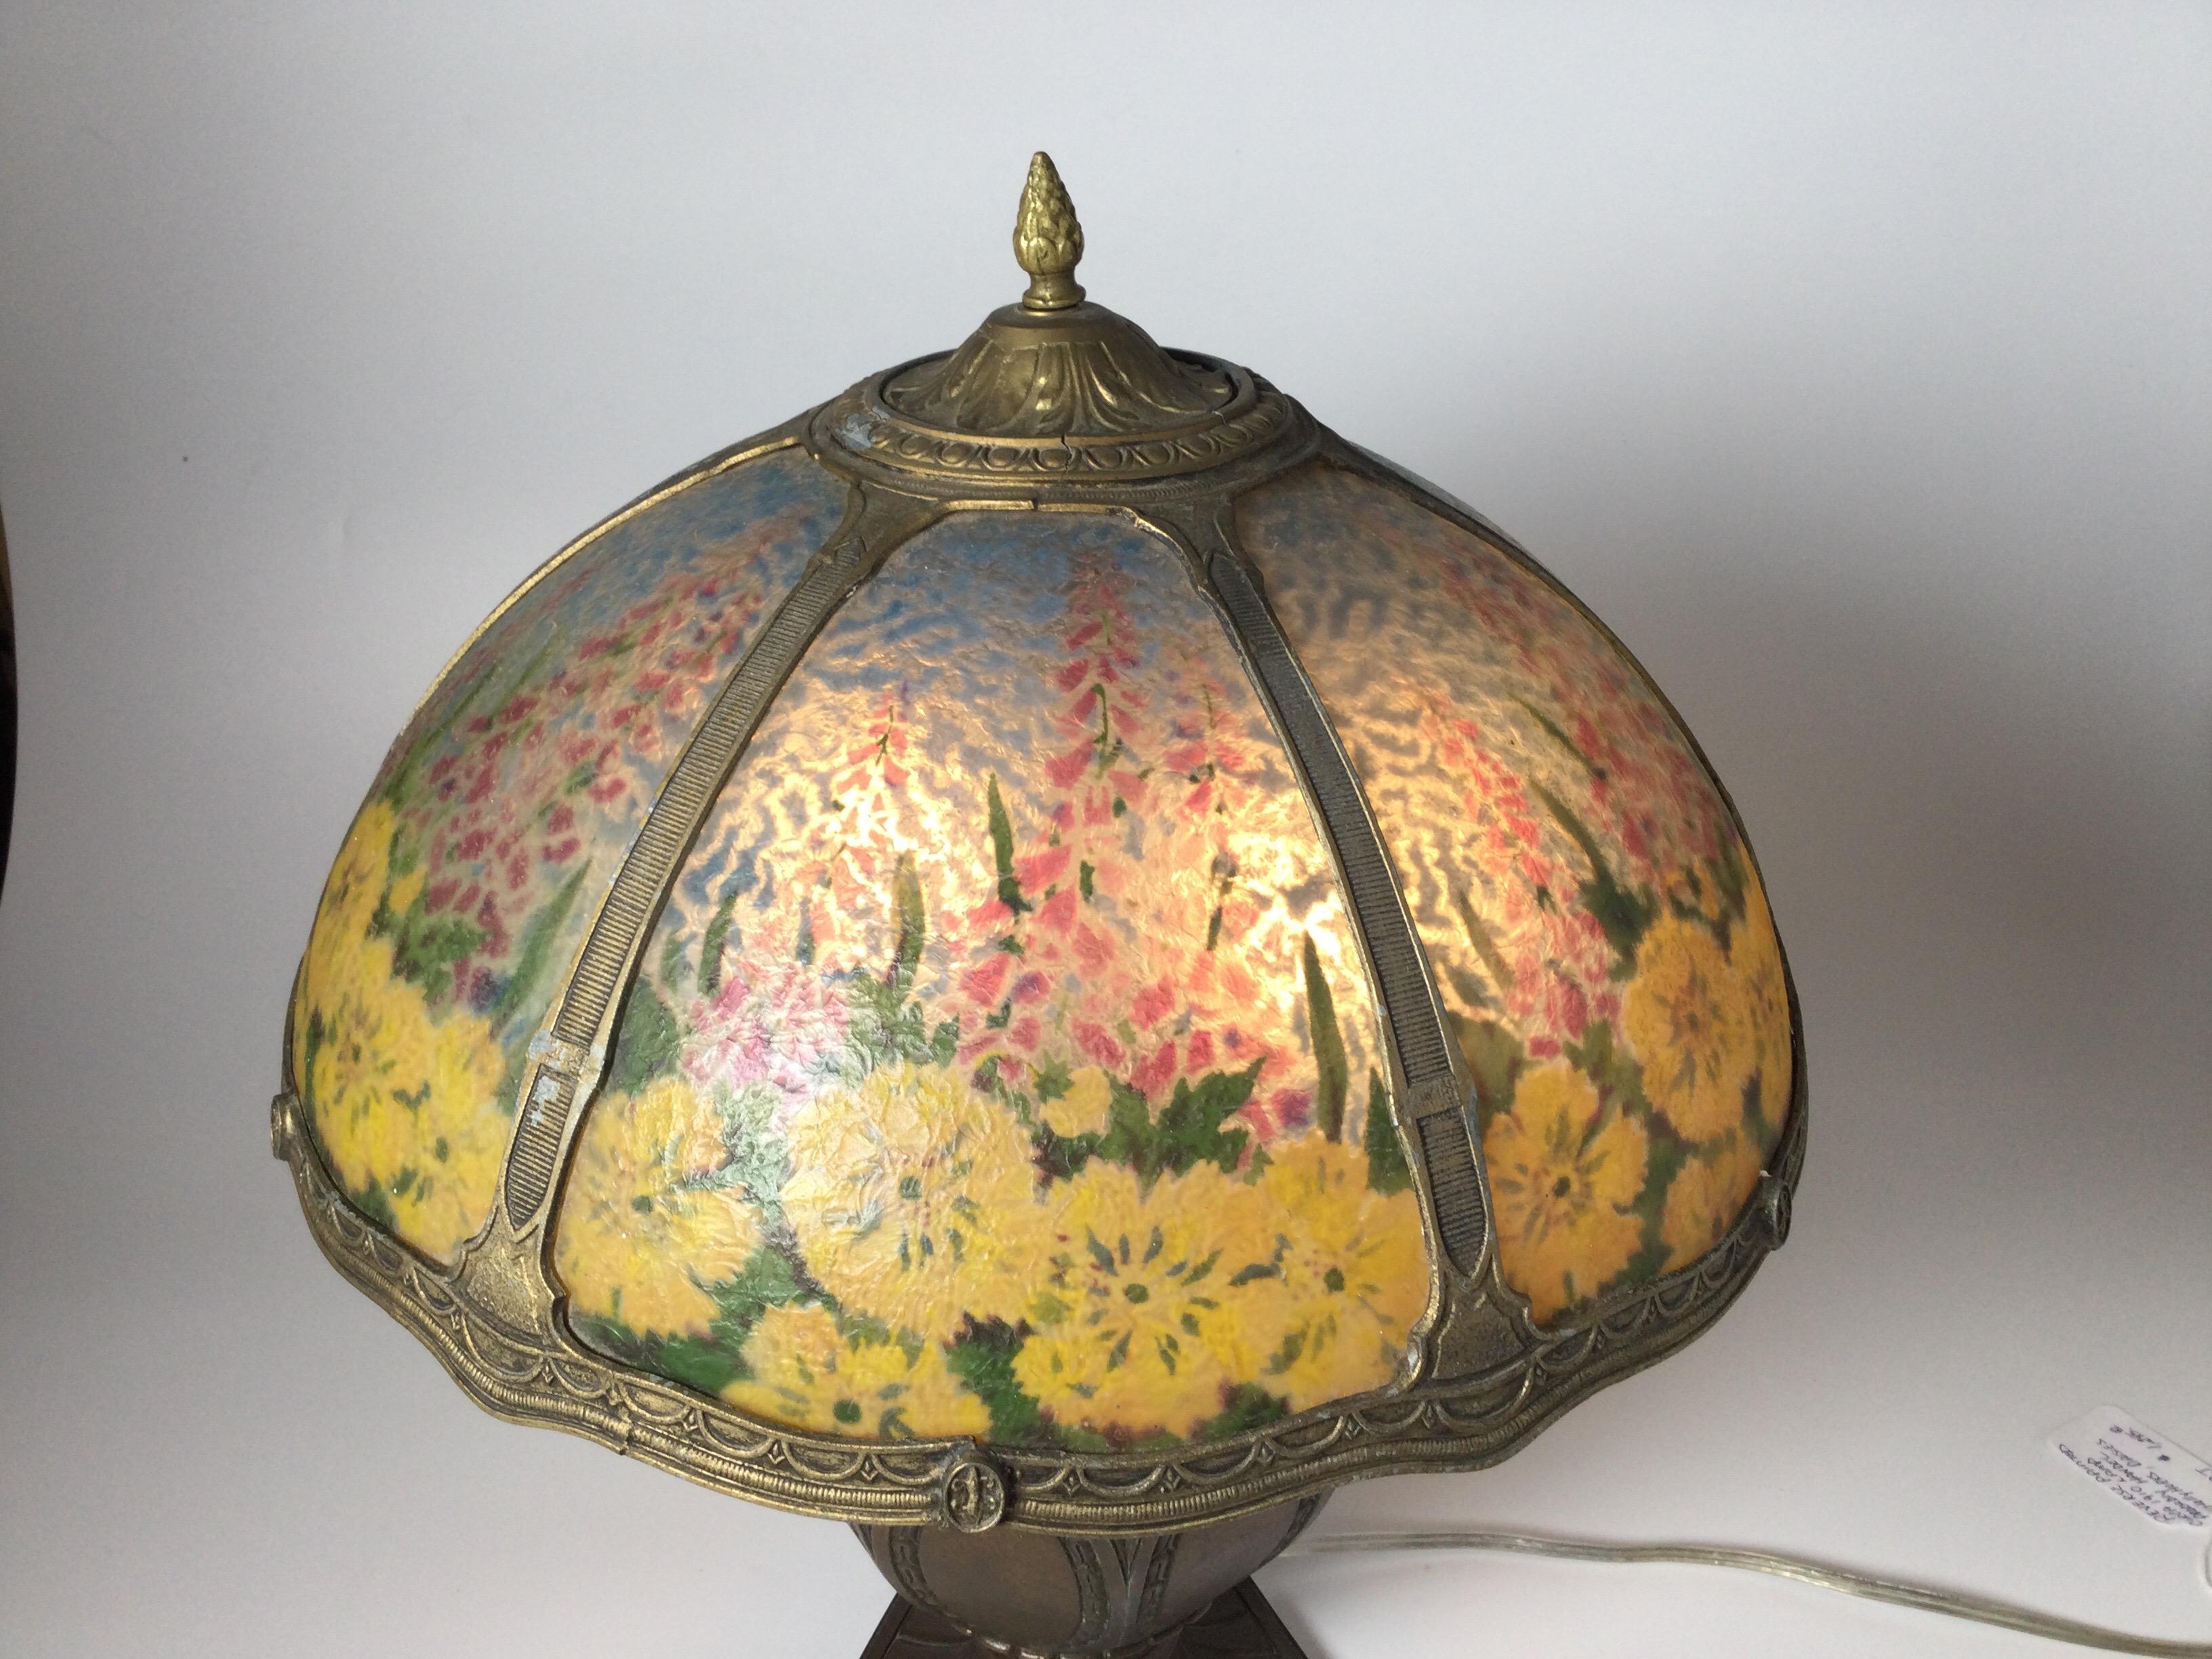 A hand reverse hand painted glass table lamp with bronze finish base, attributed to Handel, the painting depicts holly hocks, daisies on the shade. All original in beautiful original condition. No breaks to the glass, a few light and minor scuffs to